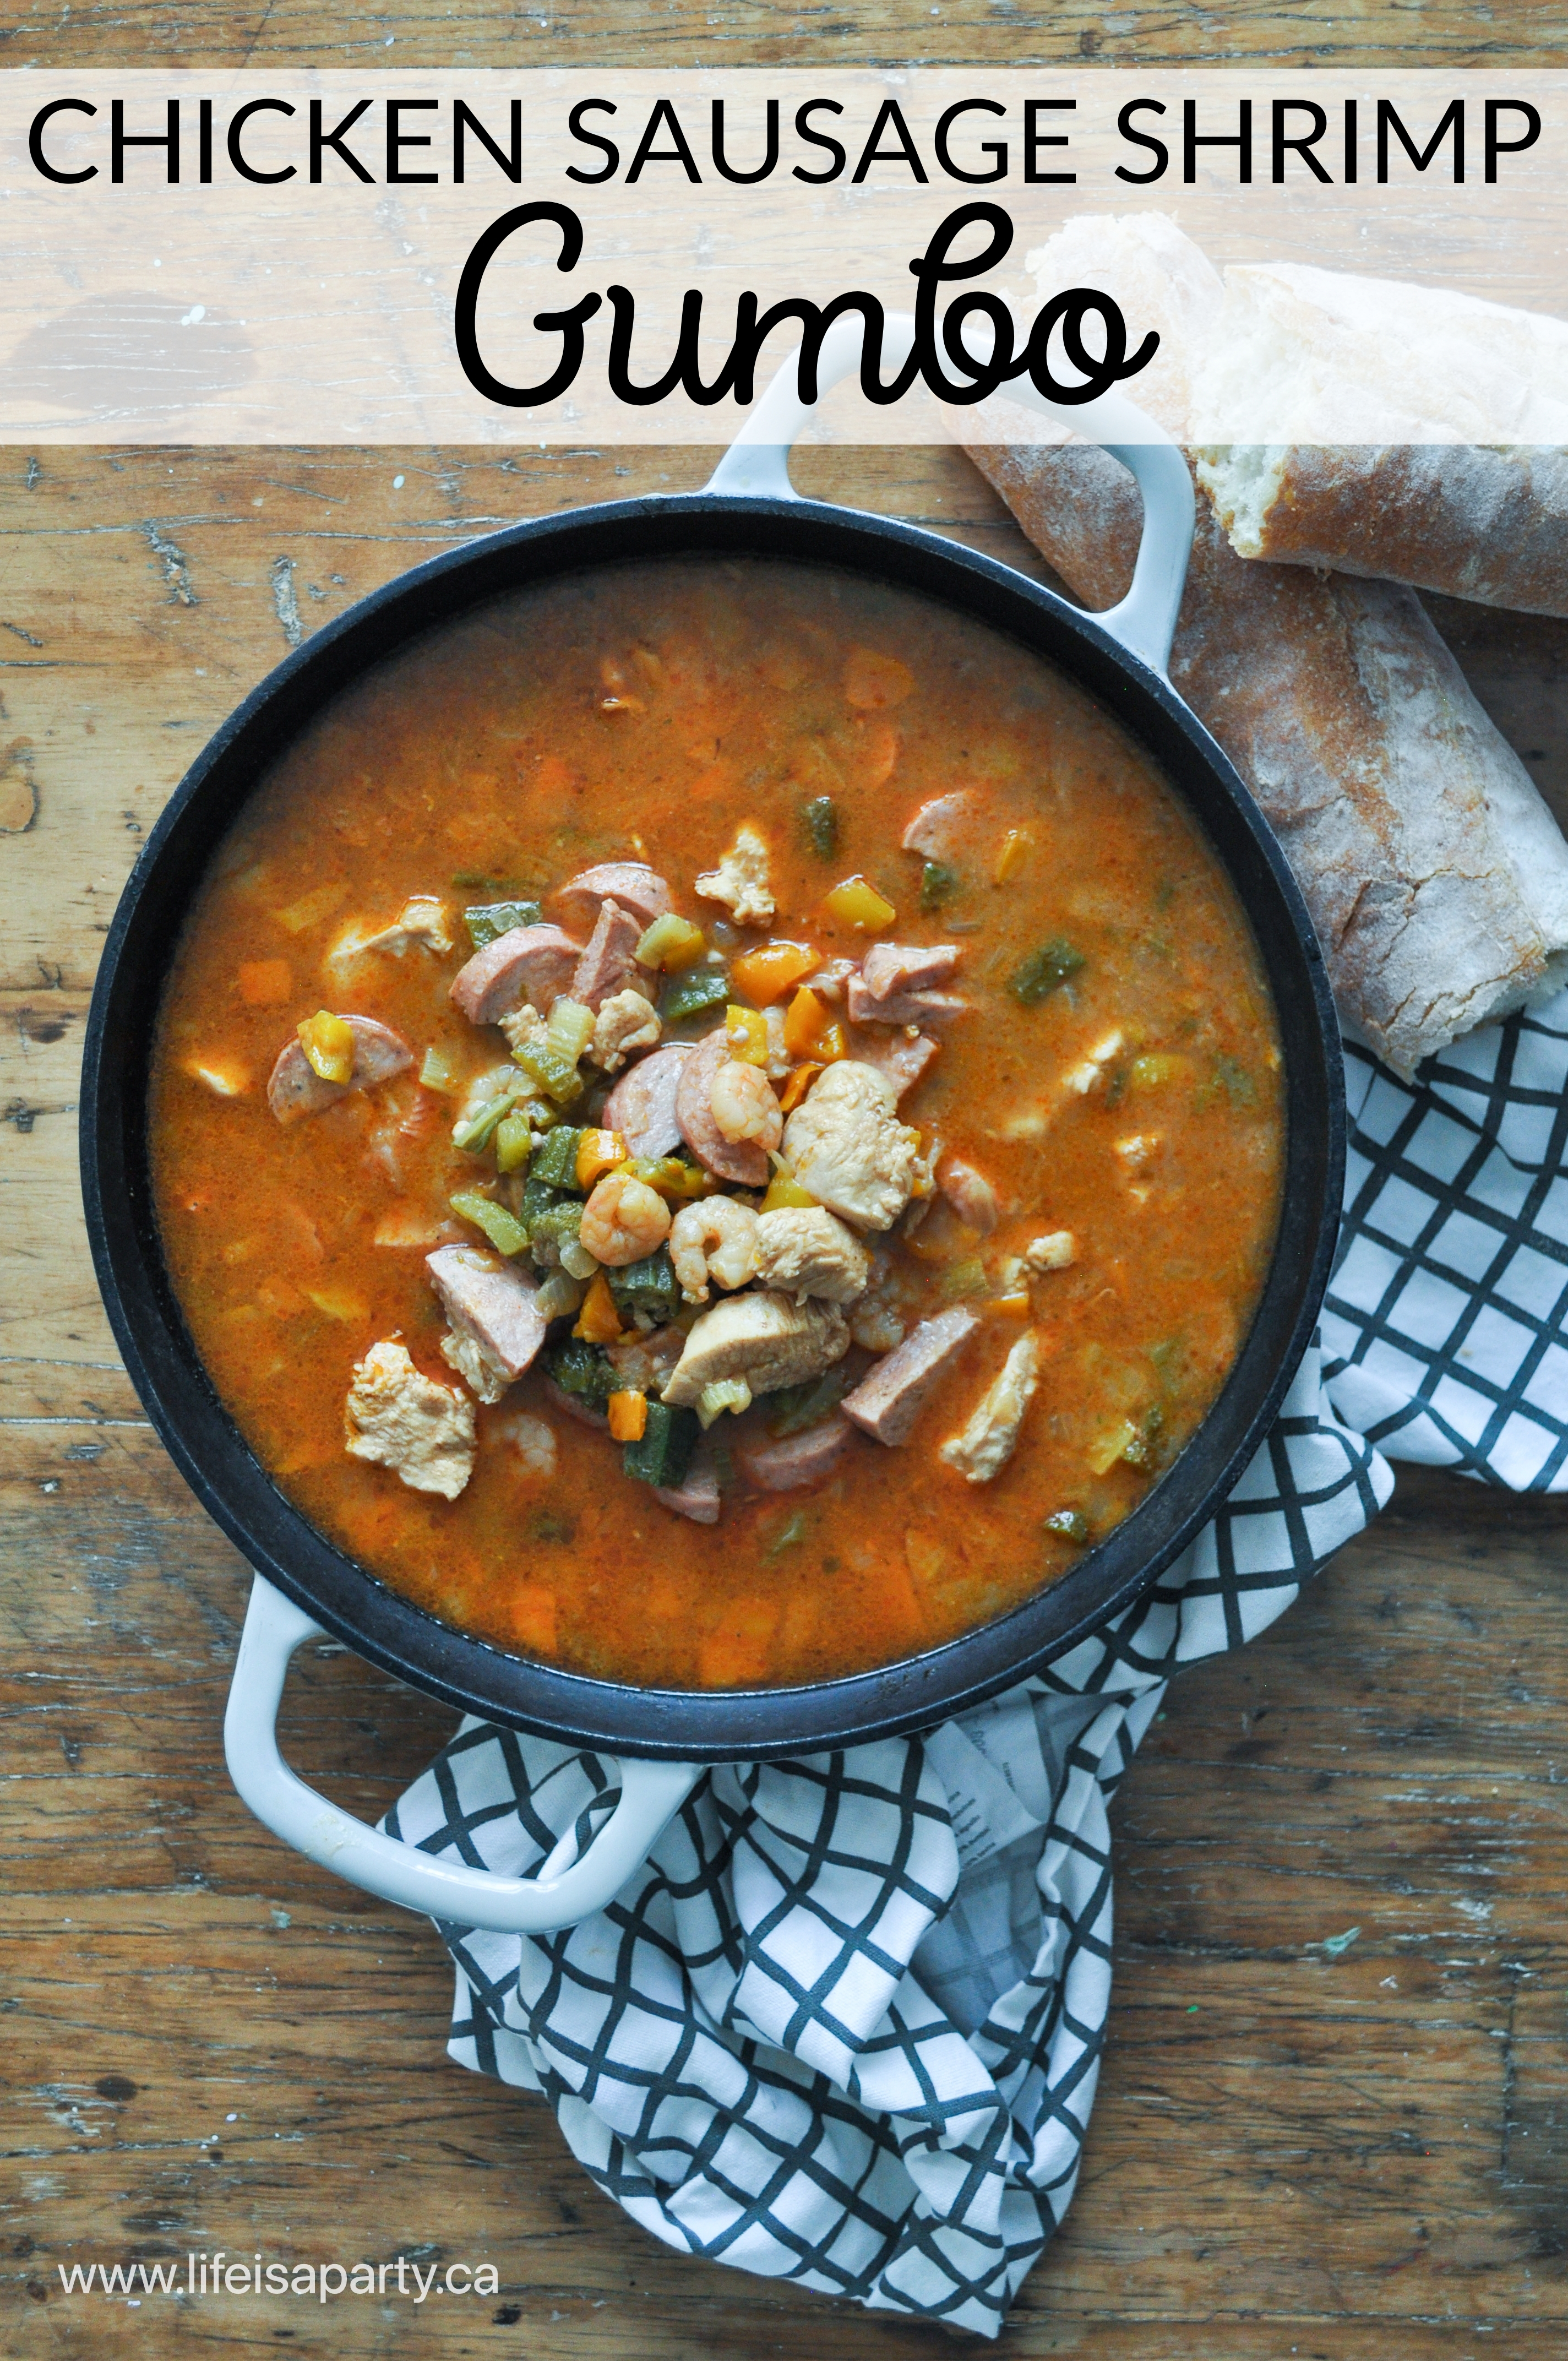 Chicken Sausage and Shrimp Gumbo Recipe: inspired by Disney Princess Tiana in The Princess and Frog this gumbo is easy and delicious.